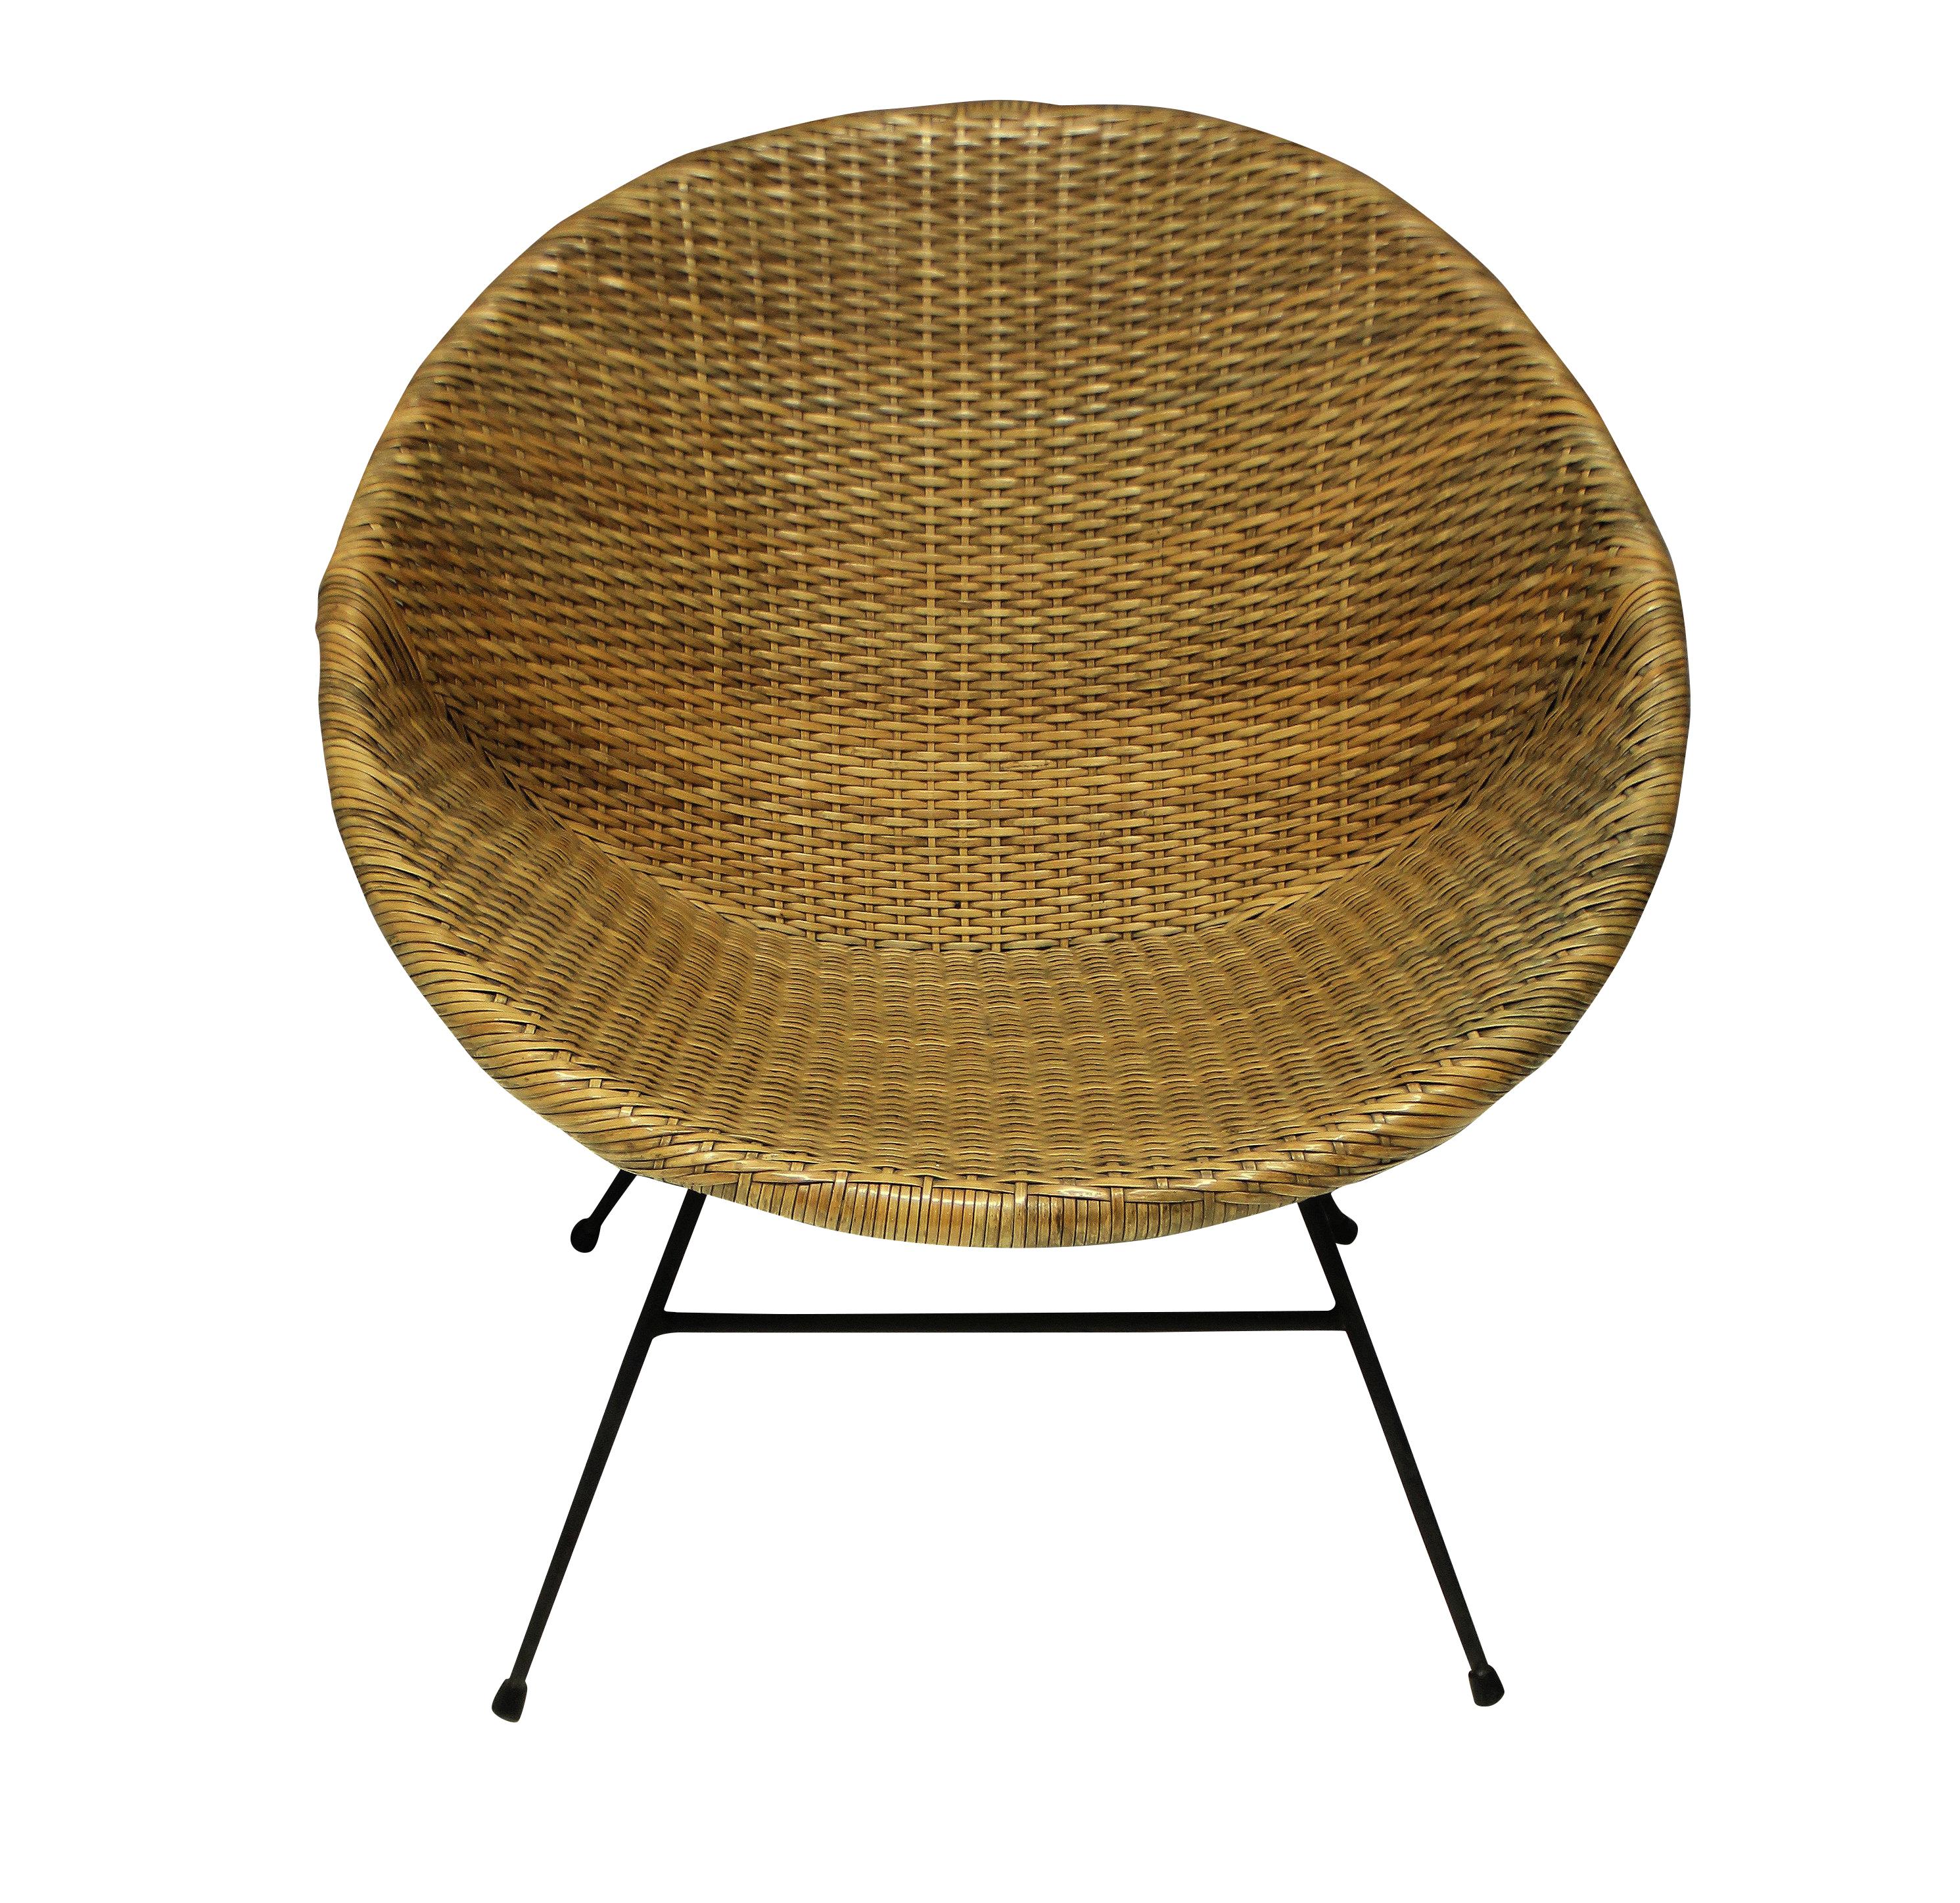 A pair of French midcentury rattan chairs of unusual design, with metal frames and cone shaped seats.